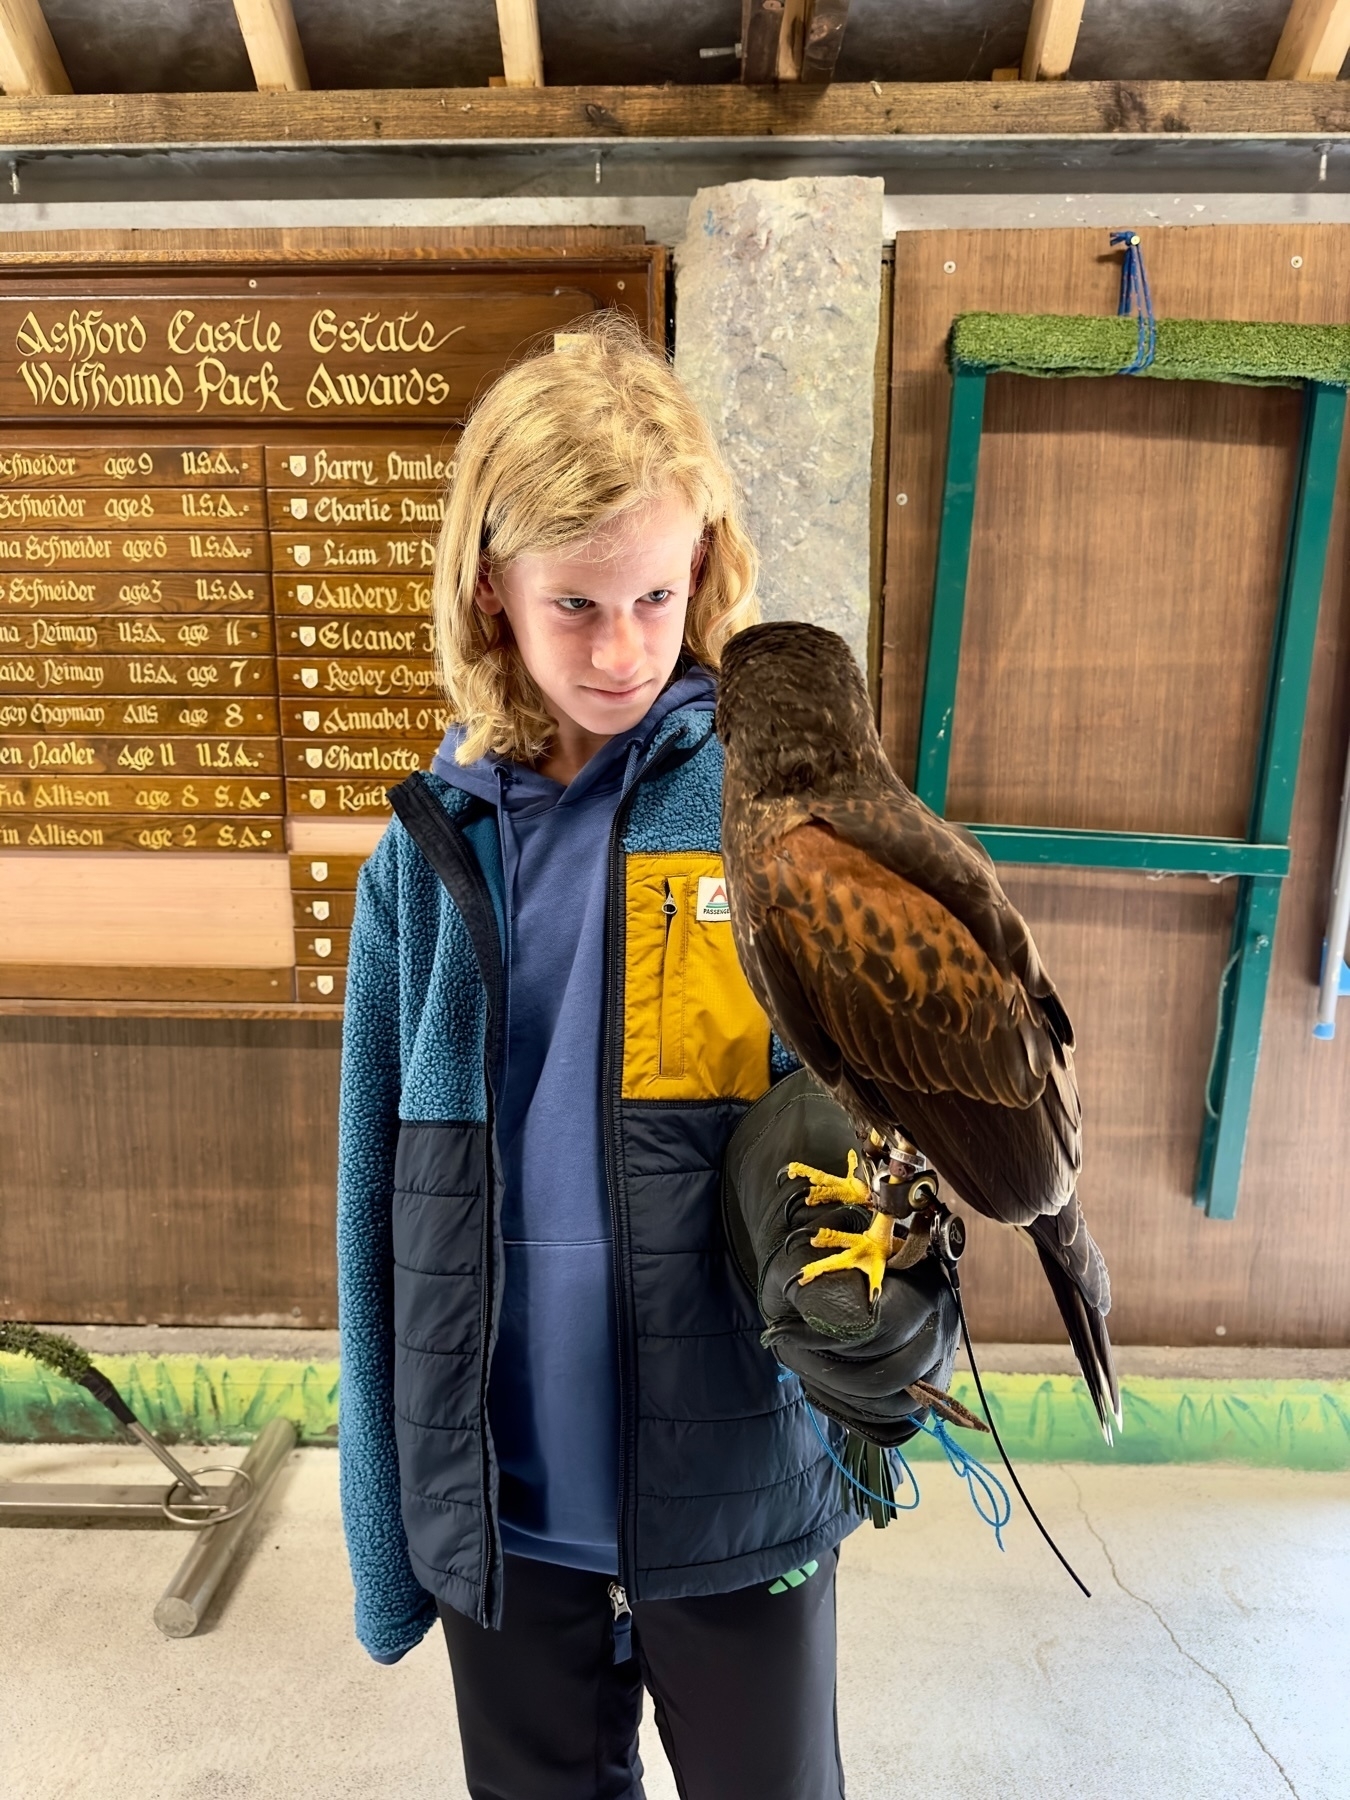 Auto-generated description: A person with blonde hair is holding a bird of prey on their gloved hand inside a room with a wooden plaque listing names in the background.